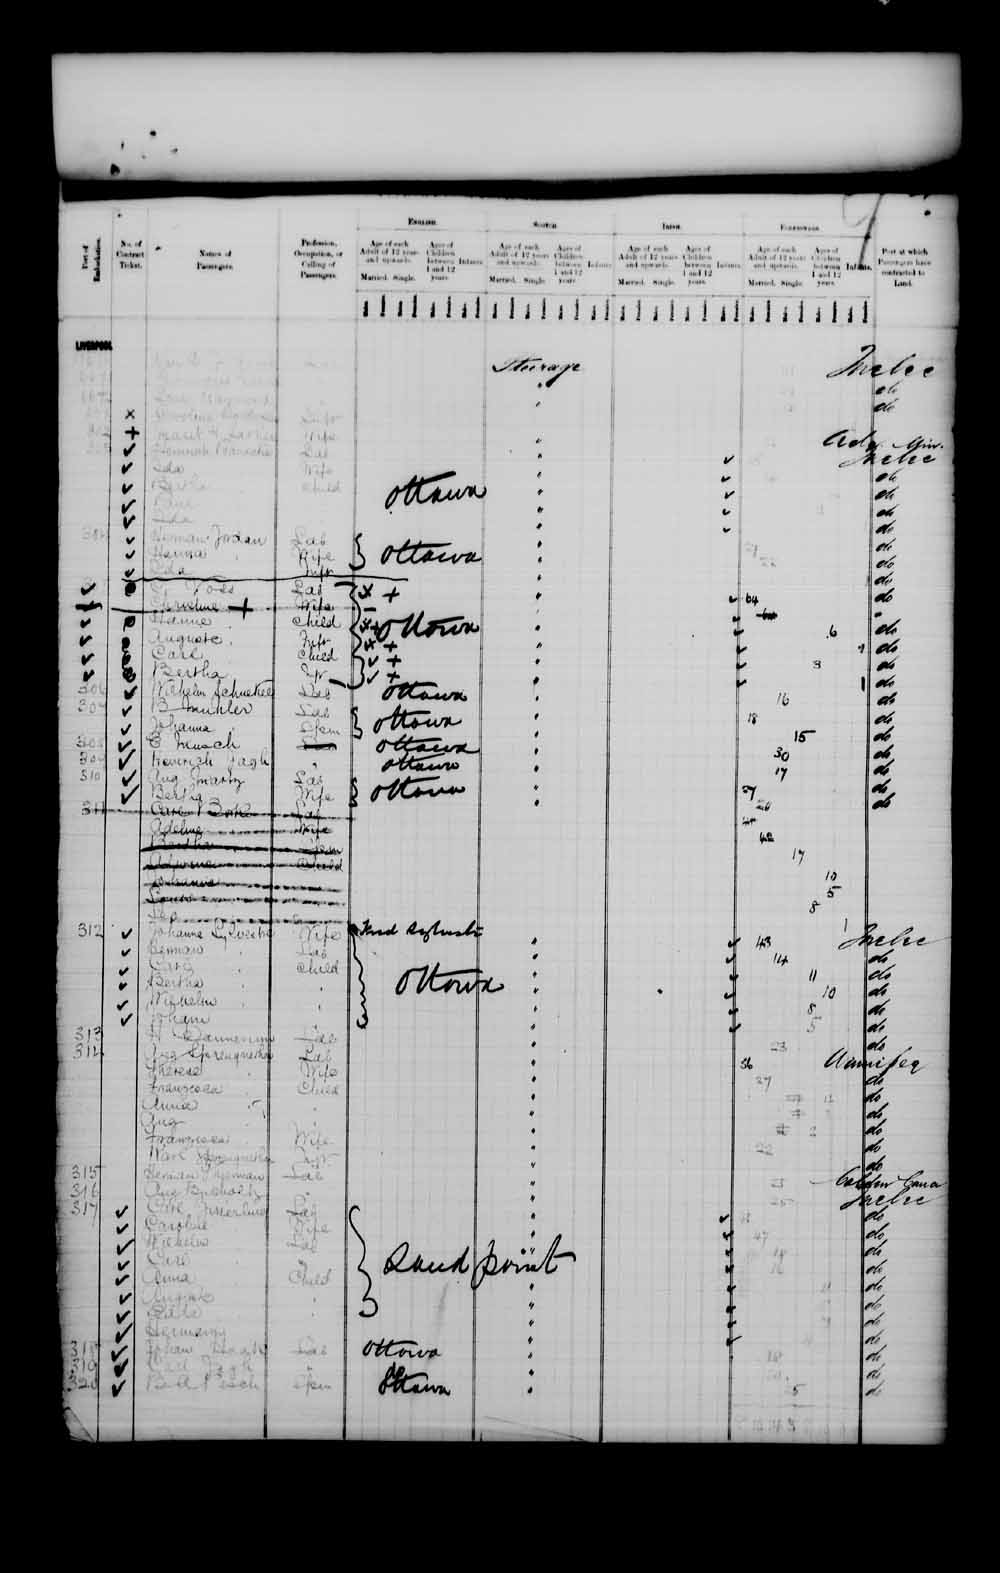 Digitized page of Passenger Lists for Image No.: e003542778